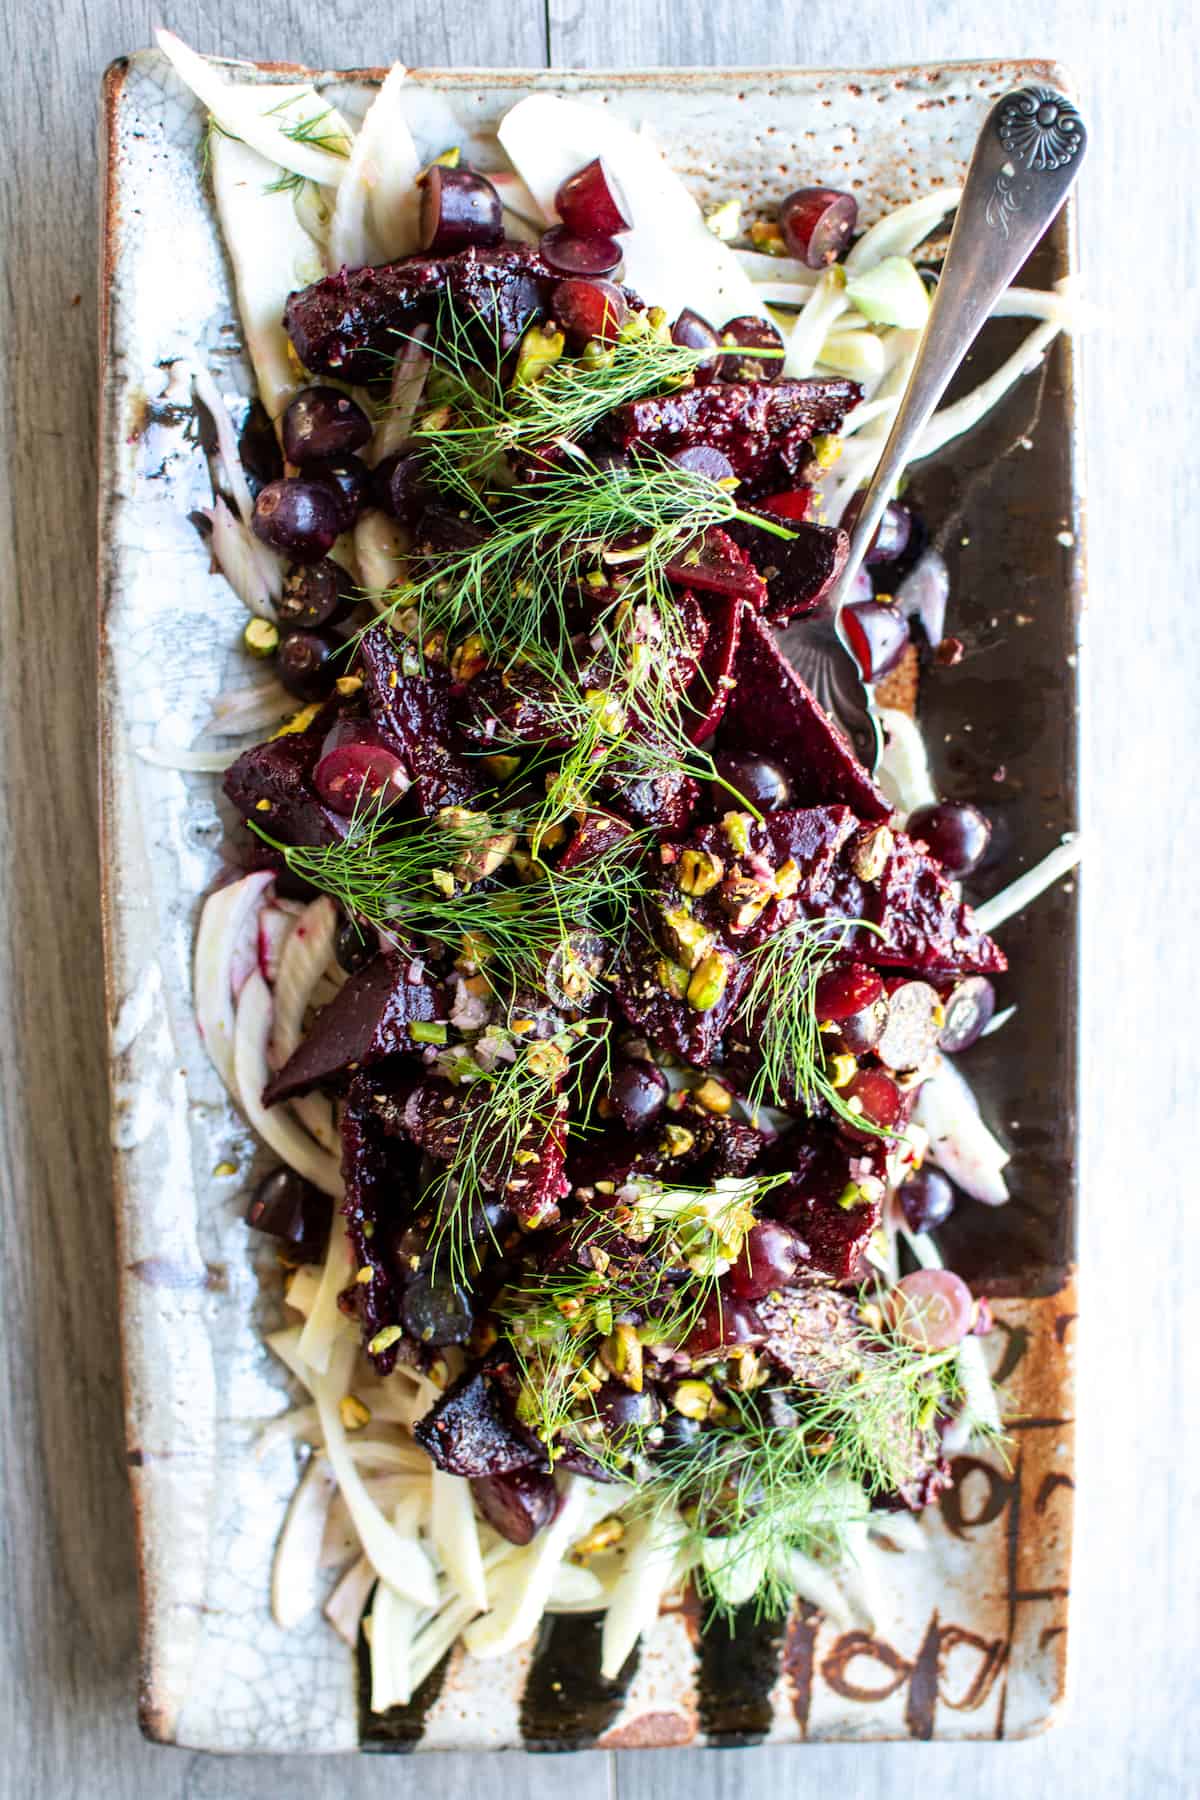 This Grape-Roasted Beet Salad with Serrano Pepper Dressing is a feast for the senses! Sweet, crunchy California grapes not only add texture and flavor to the final salad but also make a delicious marinade for the roasted beets. This is the salad that will elevate your next get-together. #beetsalad #spicysaladdressing #beetsaladdressing #ad